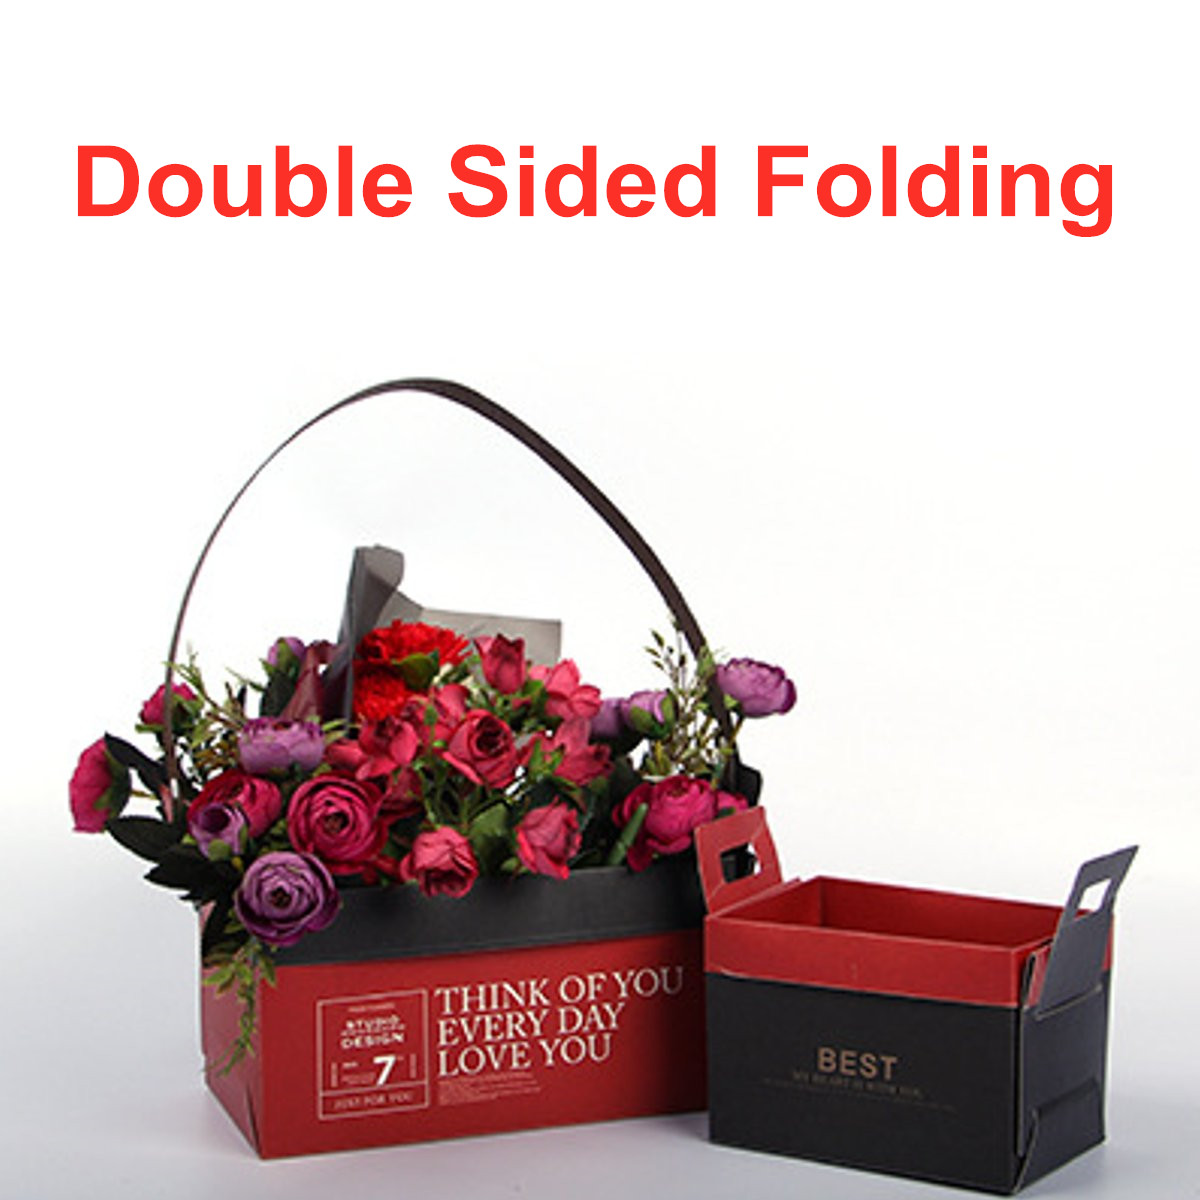 Folding-Flower-Boxes-Paper-Floral-Wrapping-Gift-Party-Wedding-Handle-10PcsSet-1803713-2